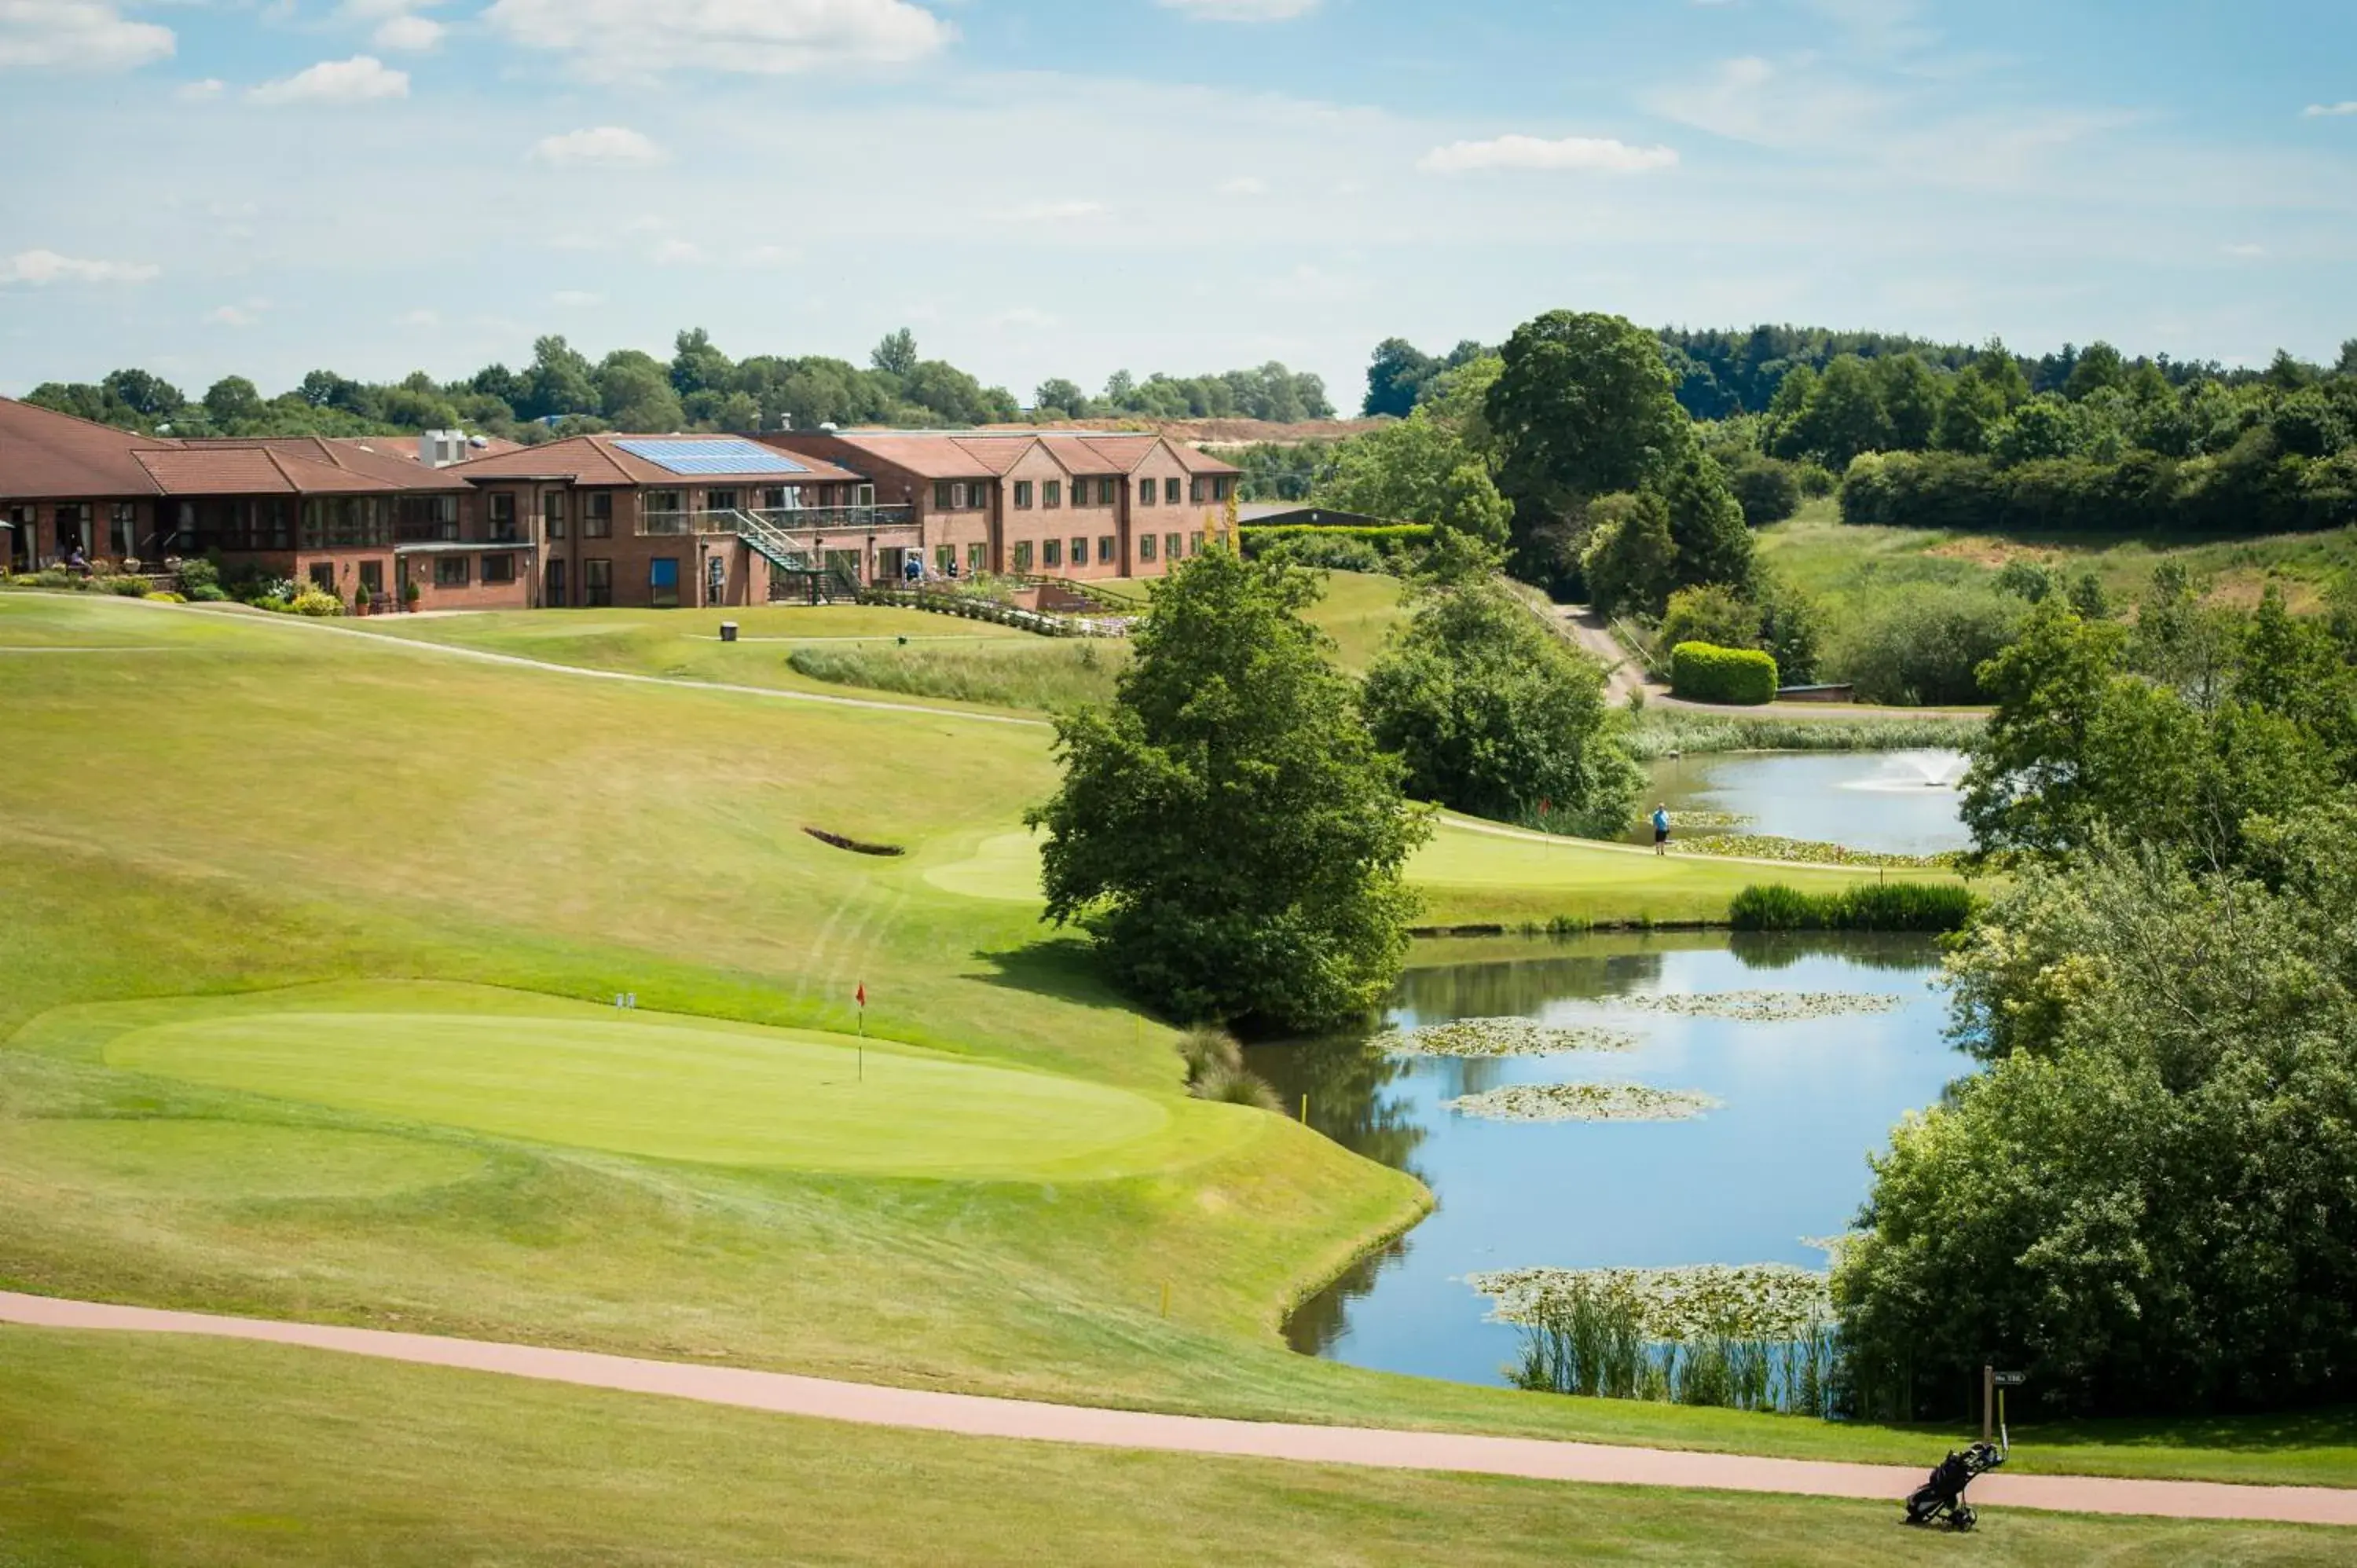 Golf in Greetham Valley